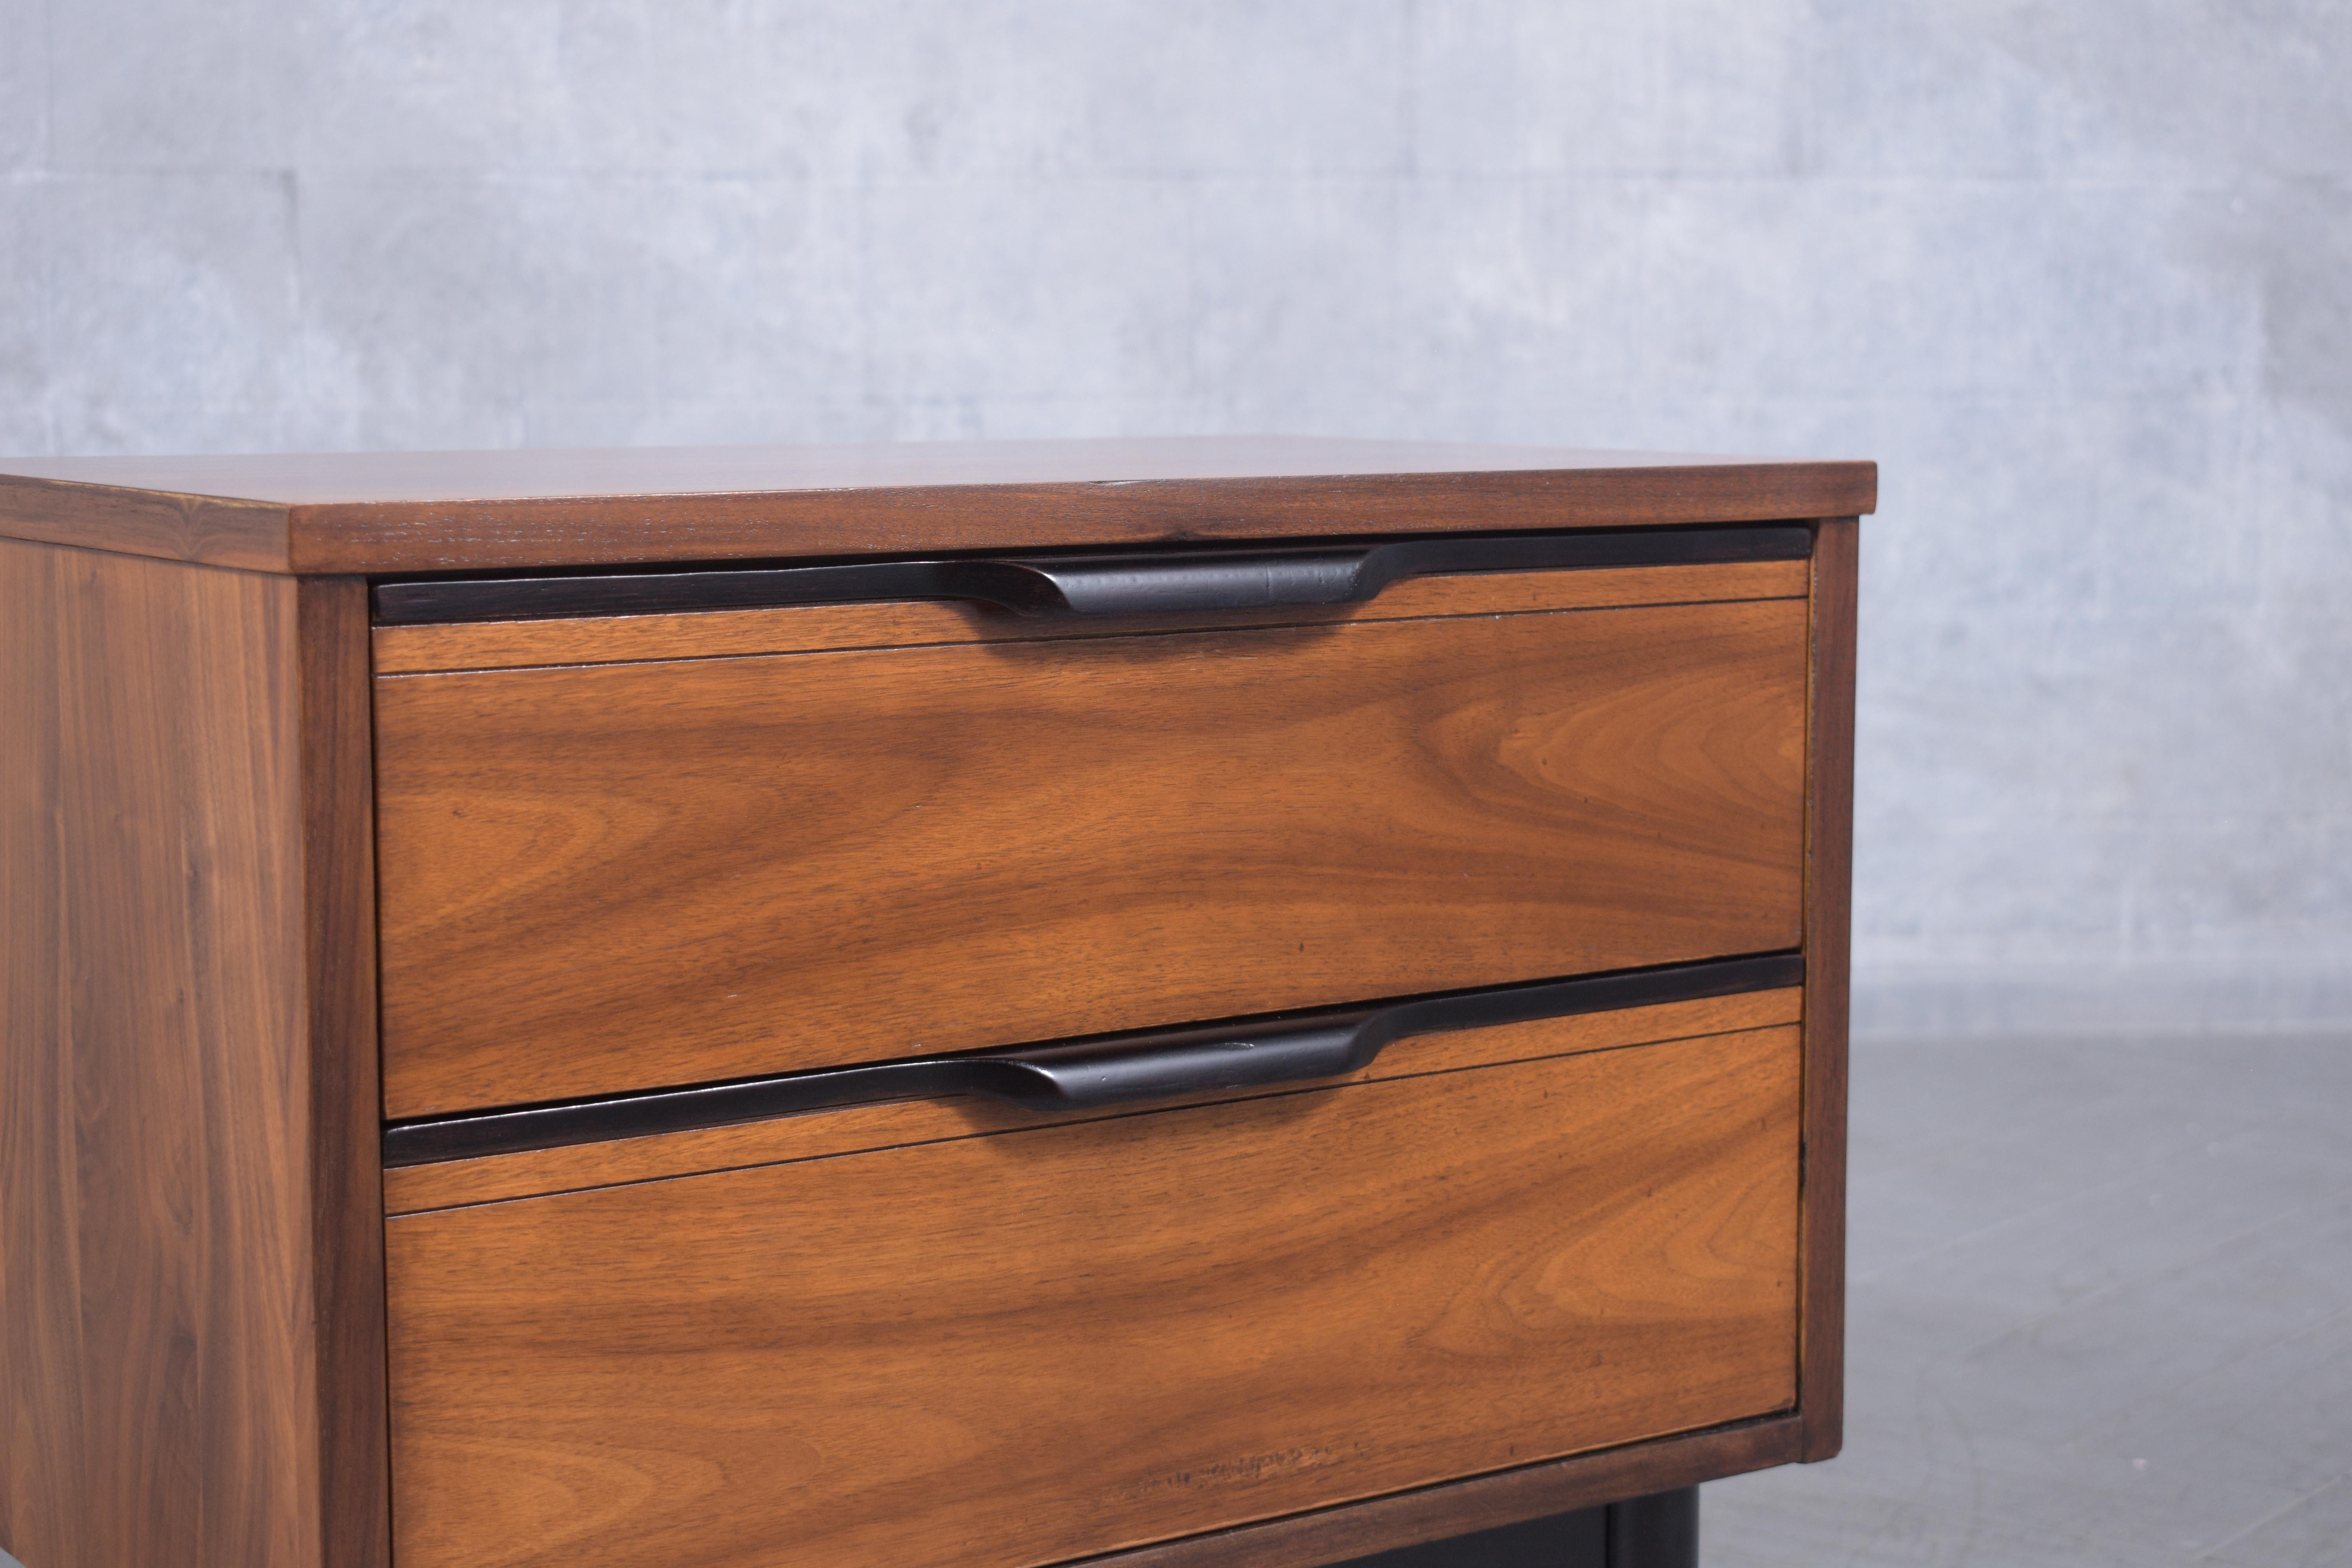 1960s Mid-Century Modern Walnut Nightstand: Ebonized Finish with Carved Details For Sale 3